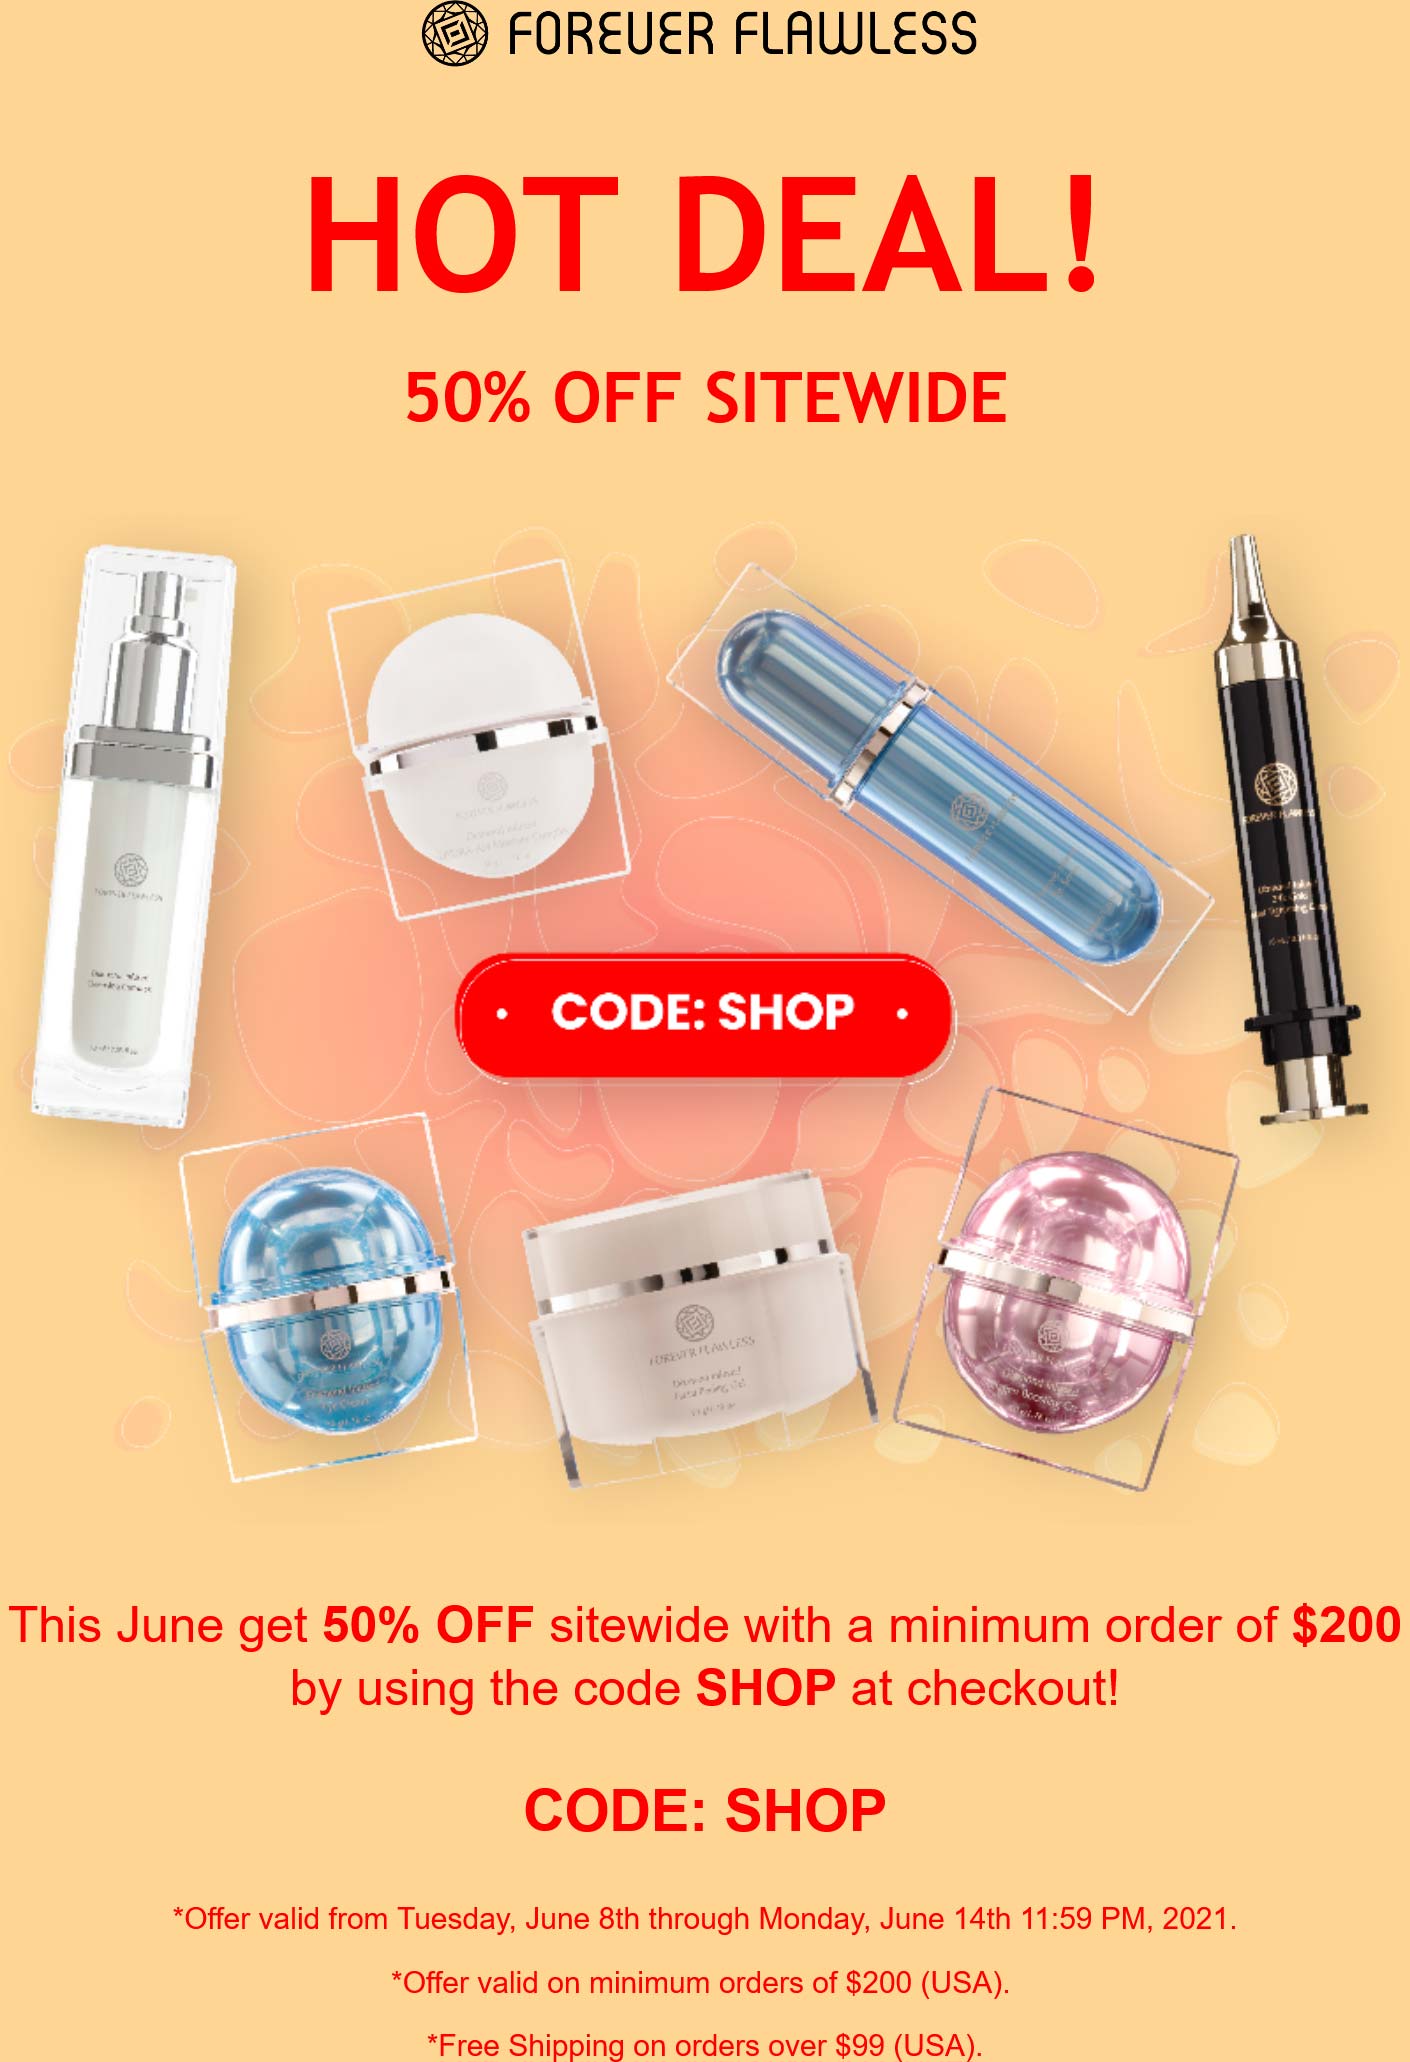 Forever Flawless stores Coupon  50% off everything today at Forever Flawless via promo code SHOP #foreverflawless 